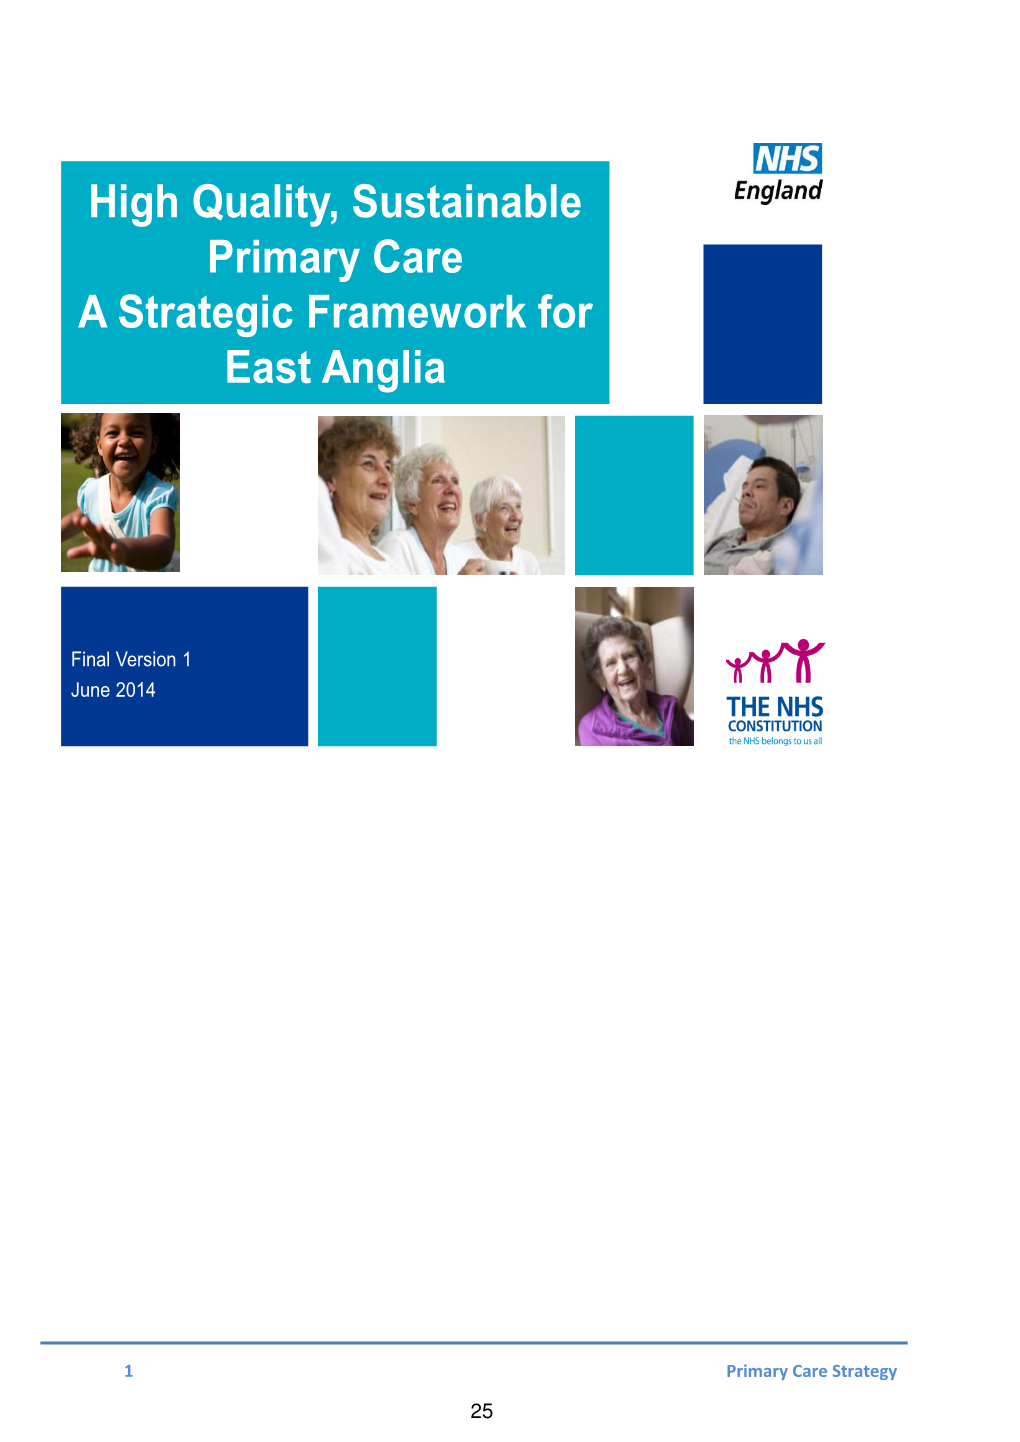 High Quality, Sustainable Primary Care a Strategic Framework for East Anglia